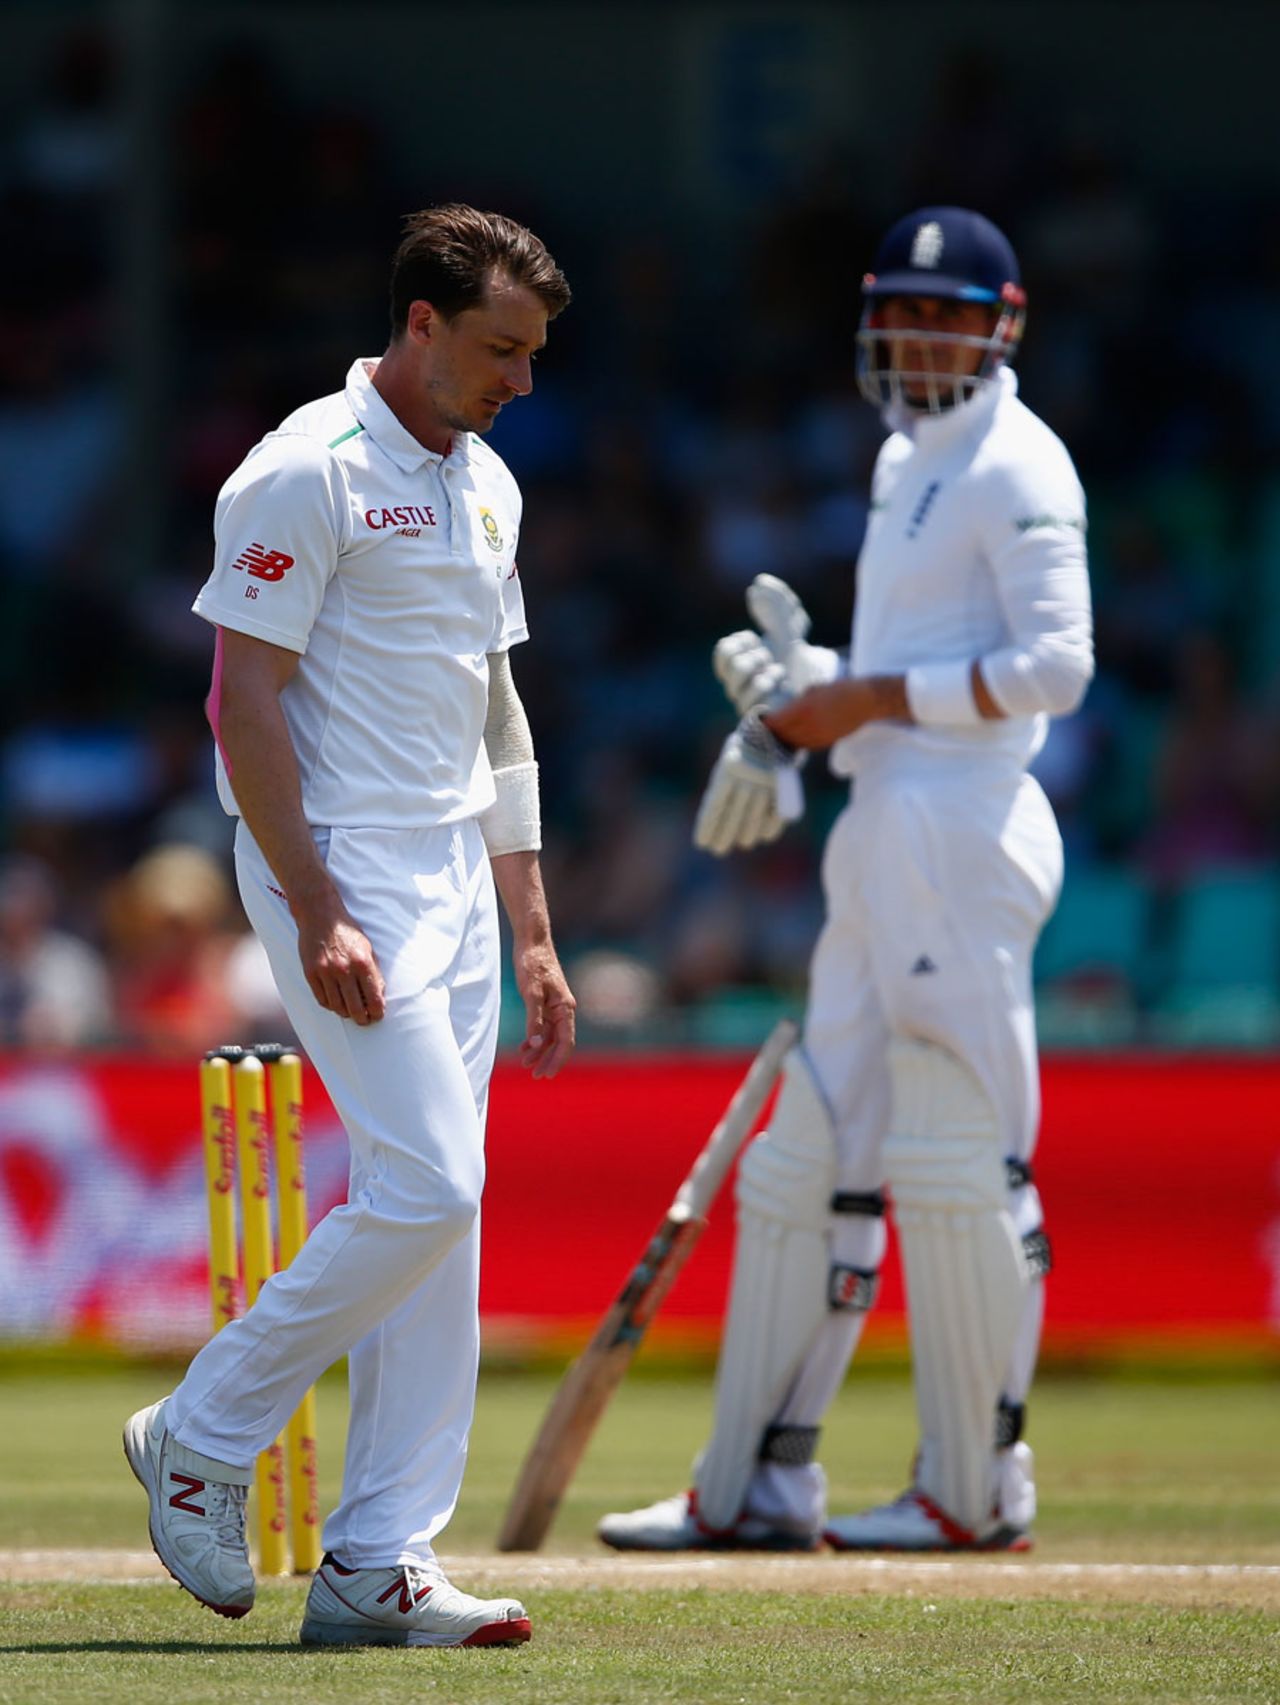 Dale Steyn twice left the field in the middle of an over, South Africa v England, 1st Test, Durban, 3rd day, December 28, 2015